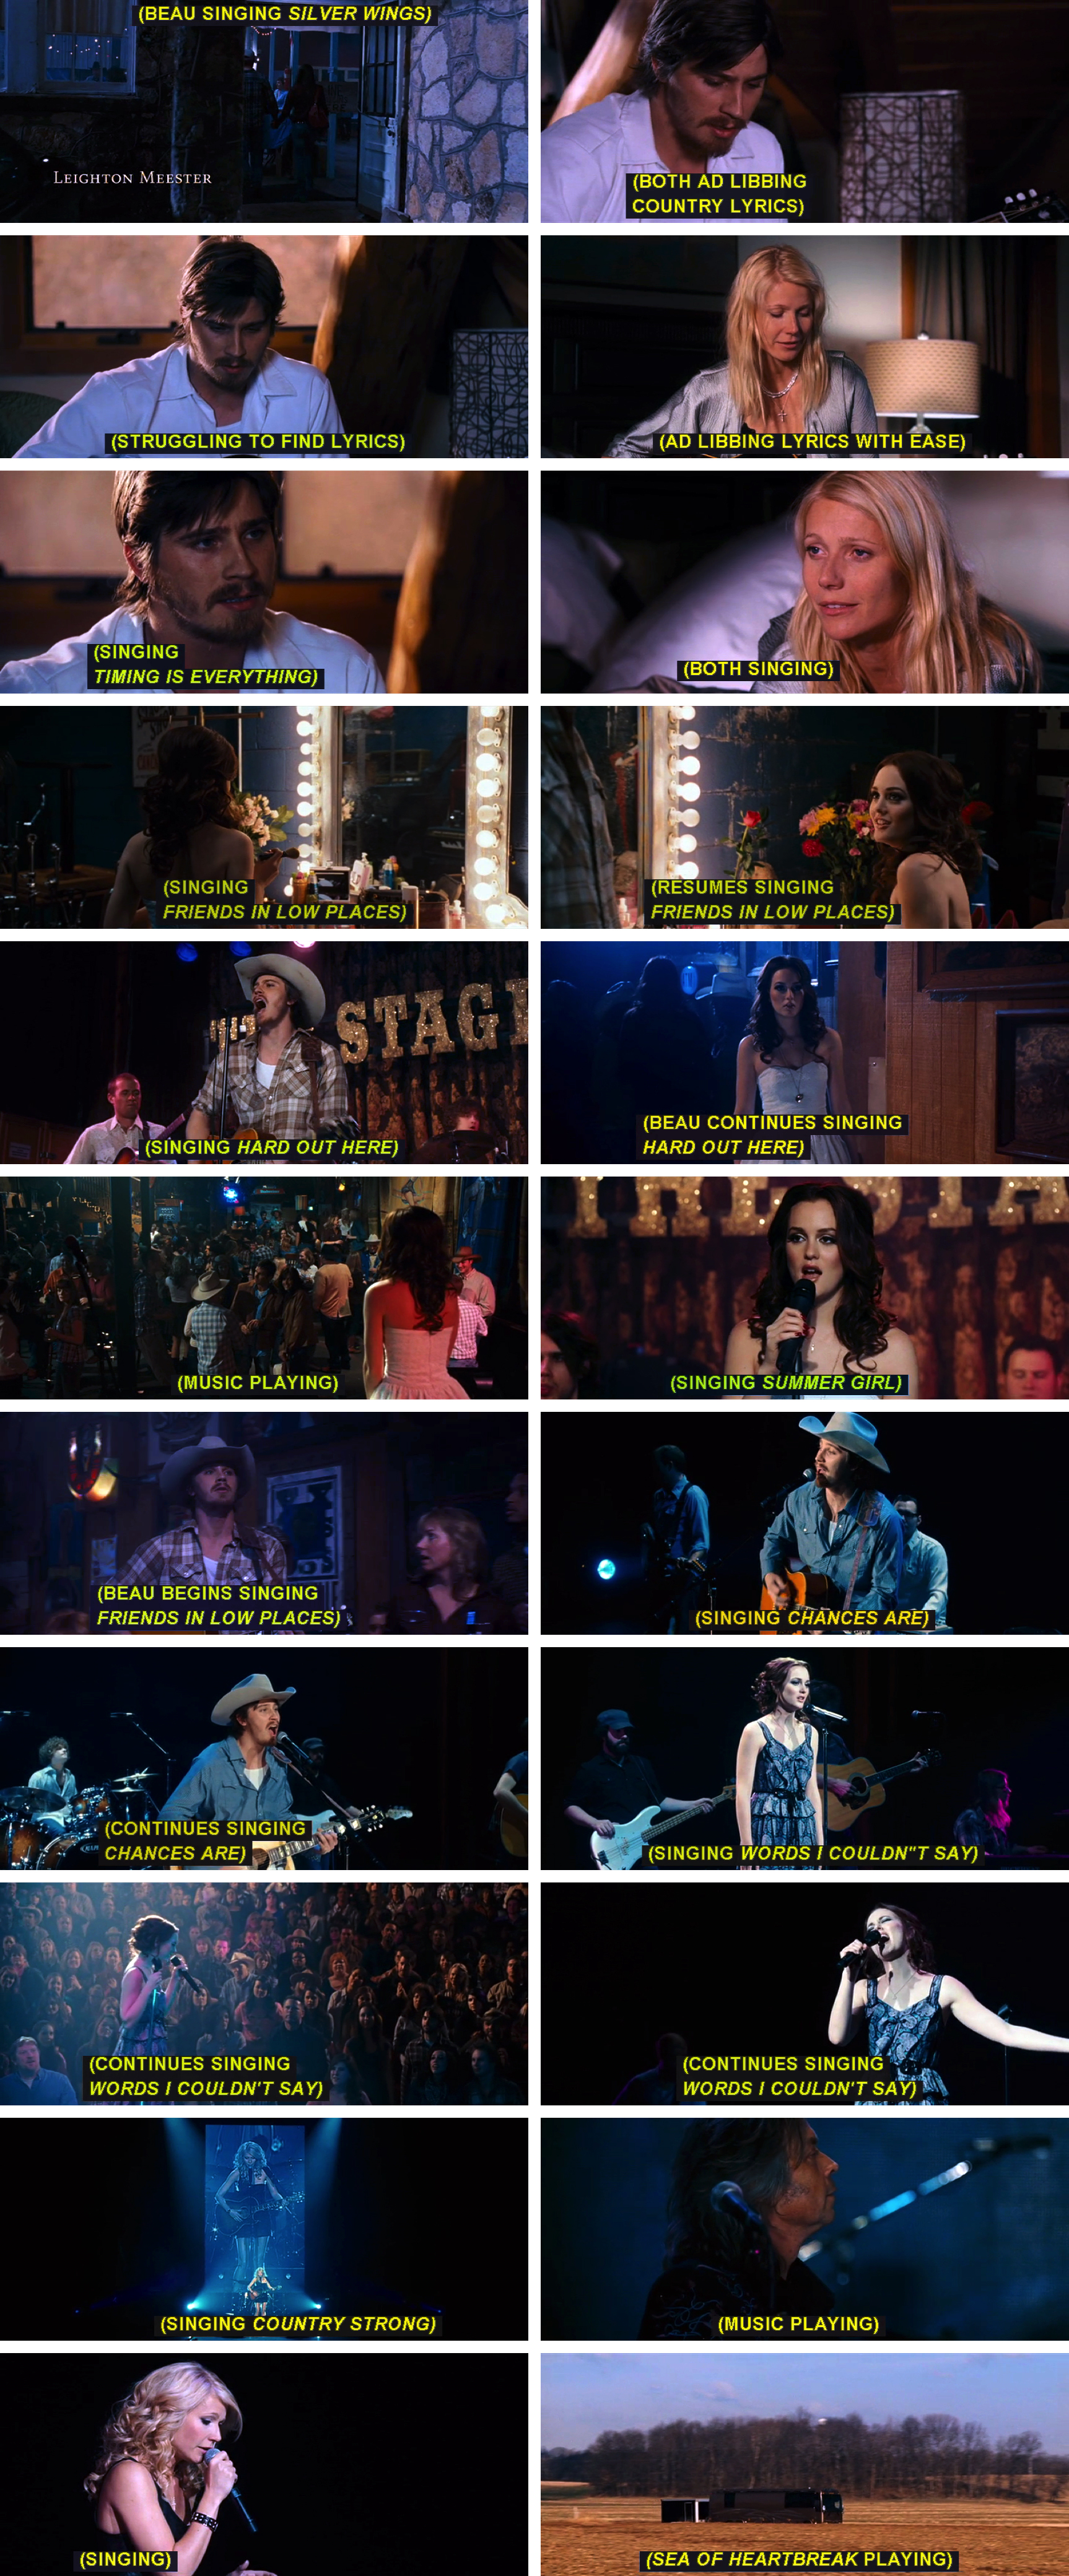 A compilation of frames from Country Strong showing the lack of music lyrics